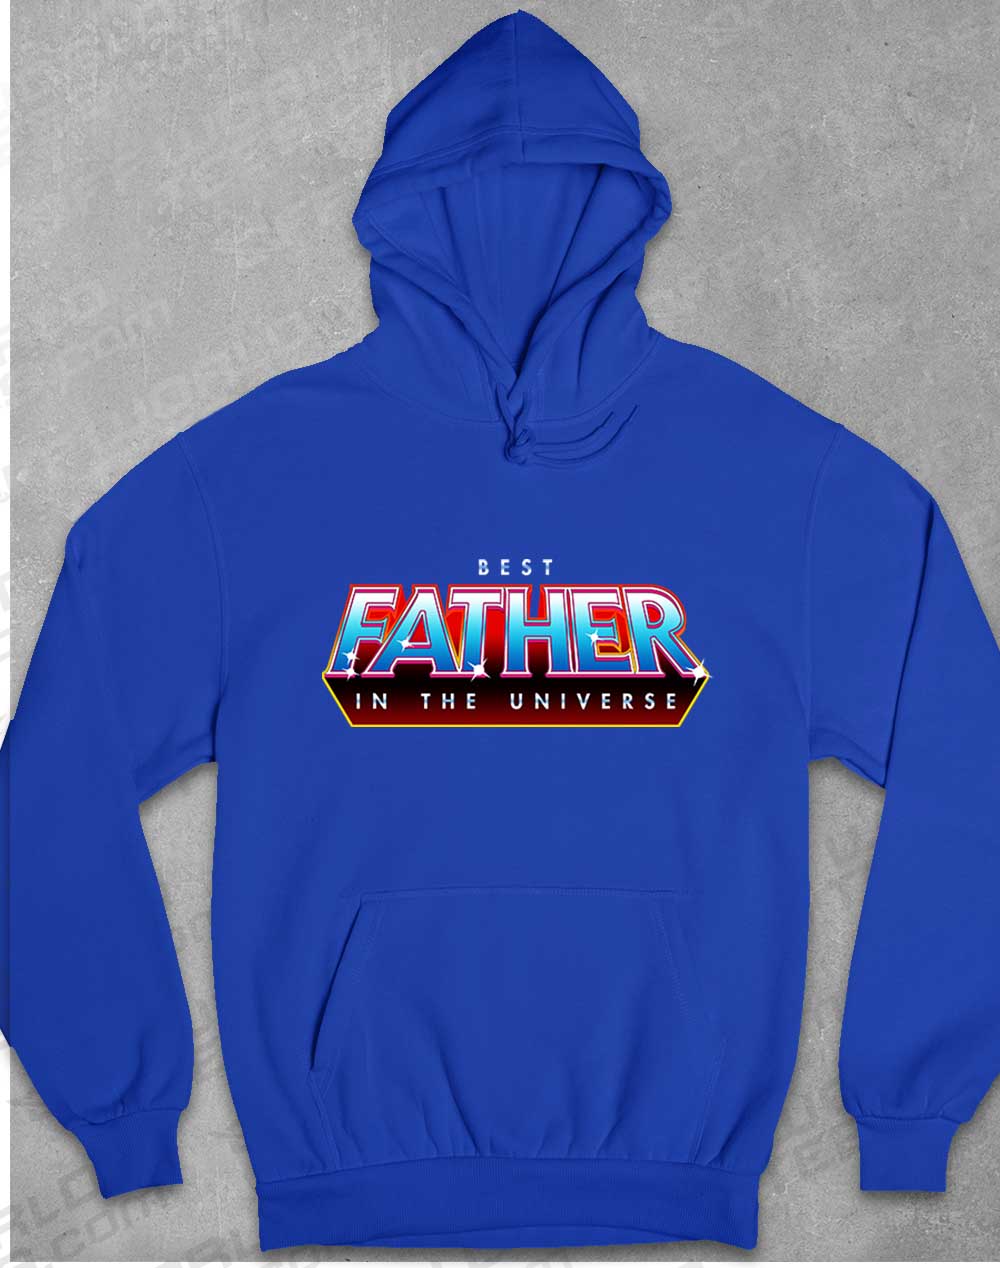 Royal Blue - Best Father in the Universe Hoodie